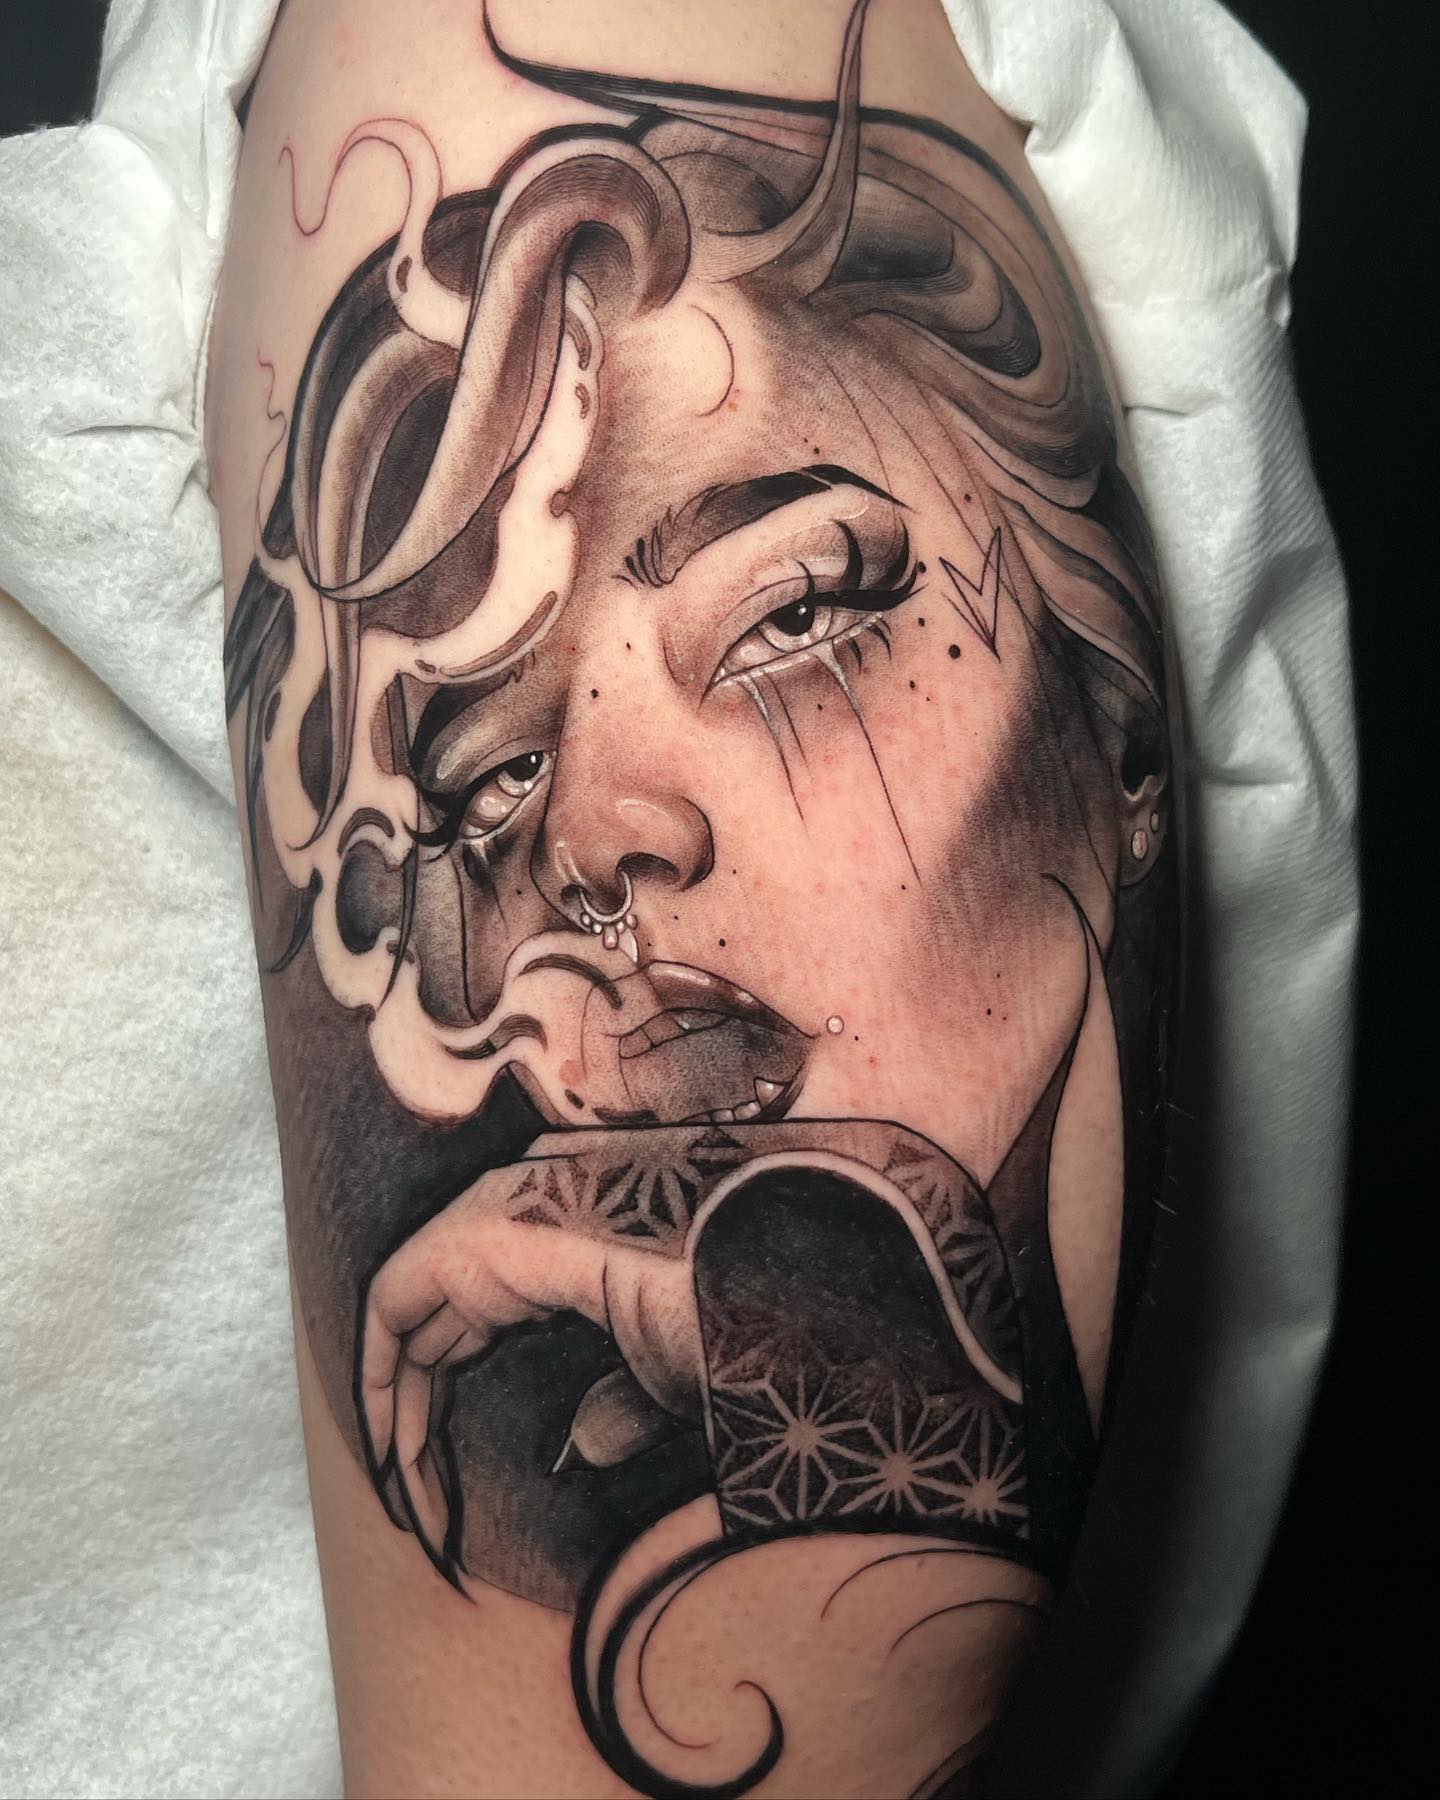 Can You Smoke Weed Before Getting a Tattoo?